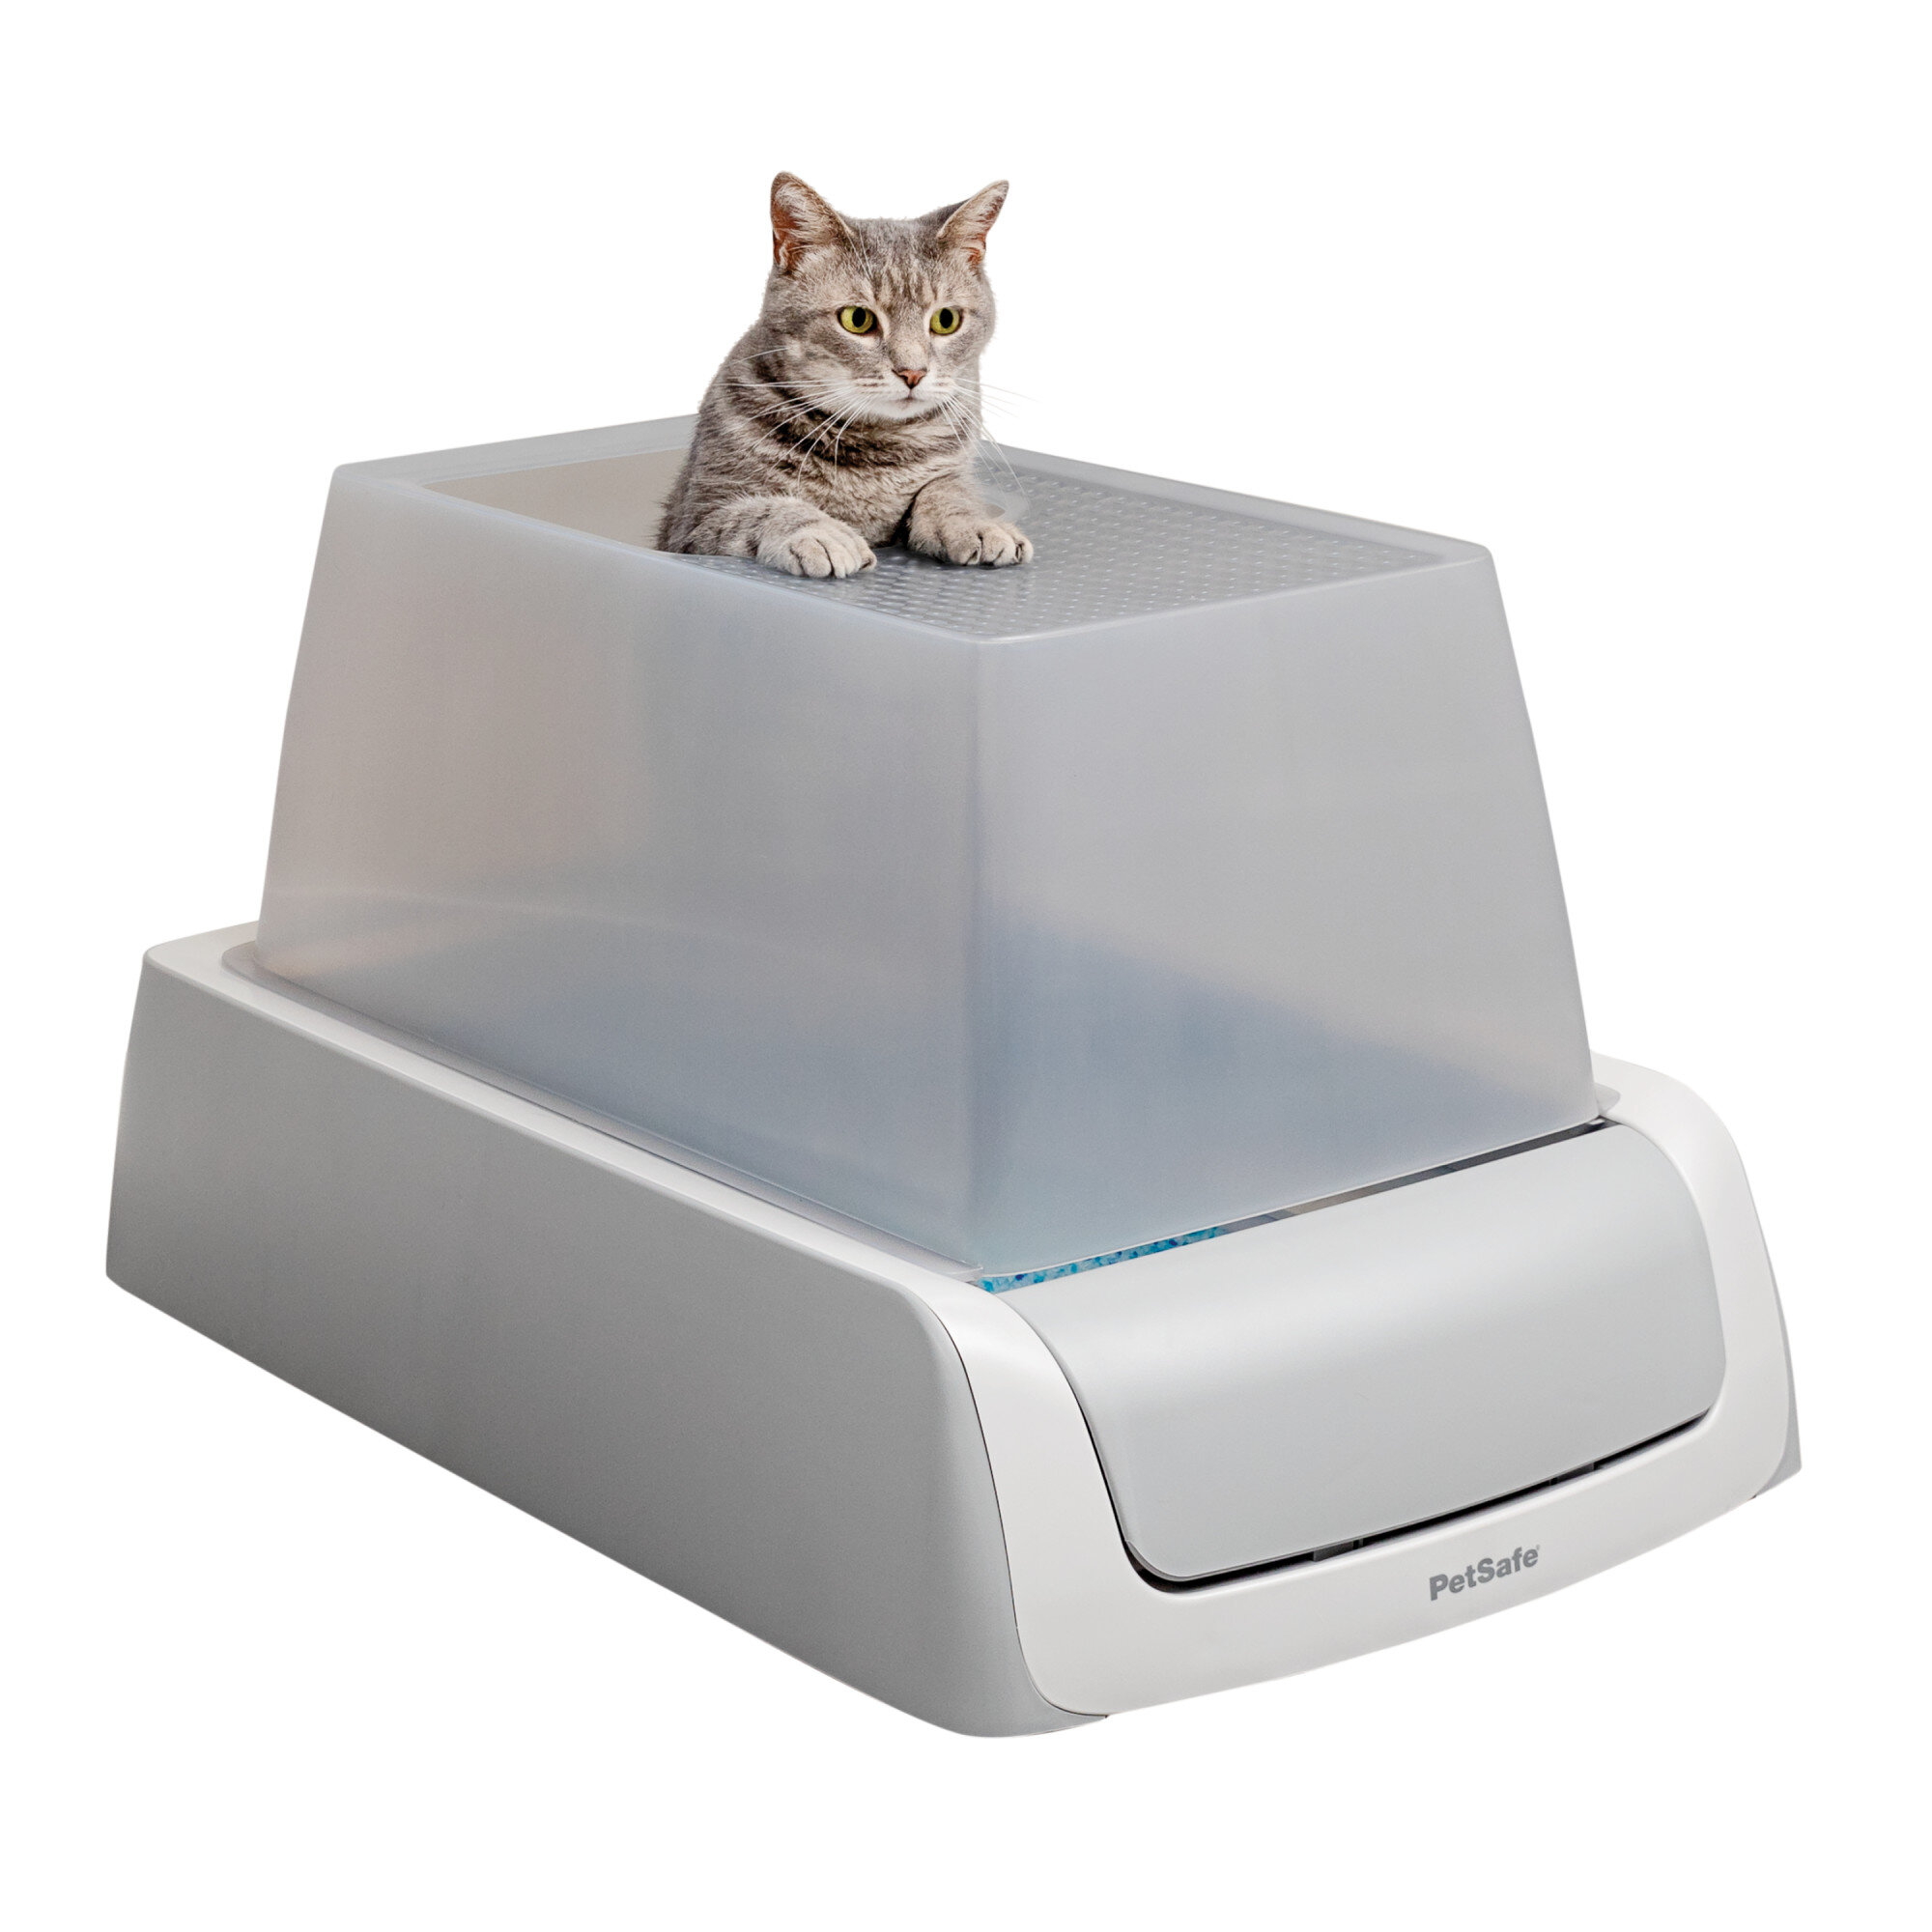 scoopfree top entry self cleaning litter box second generation